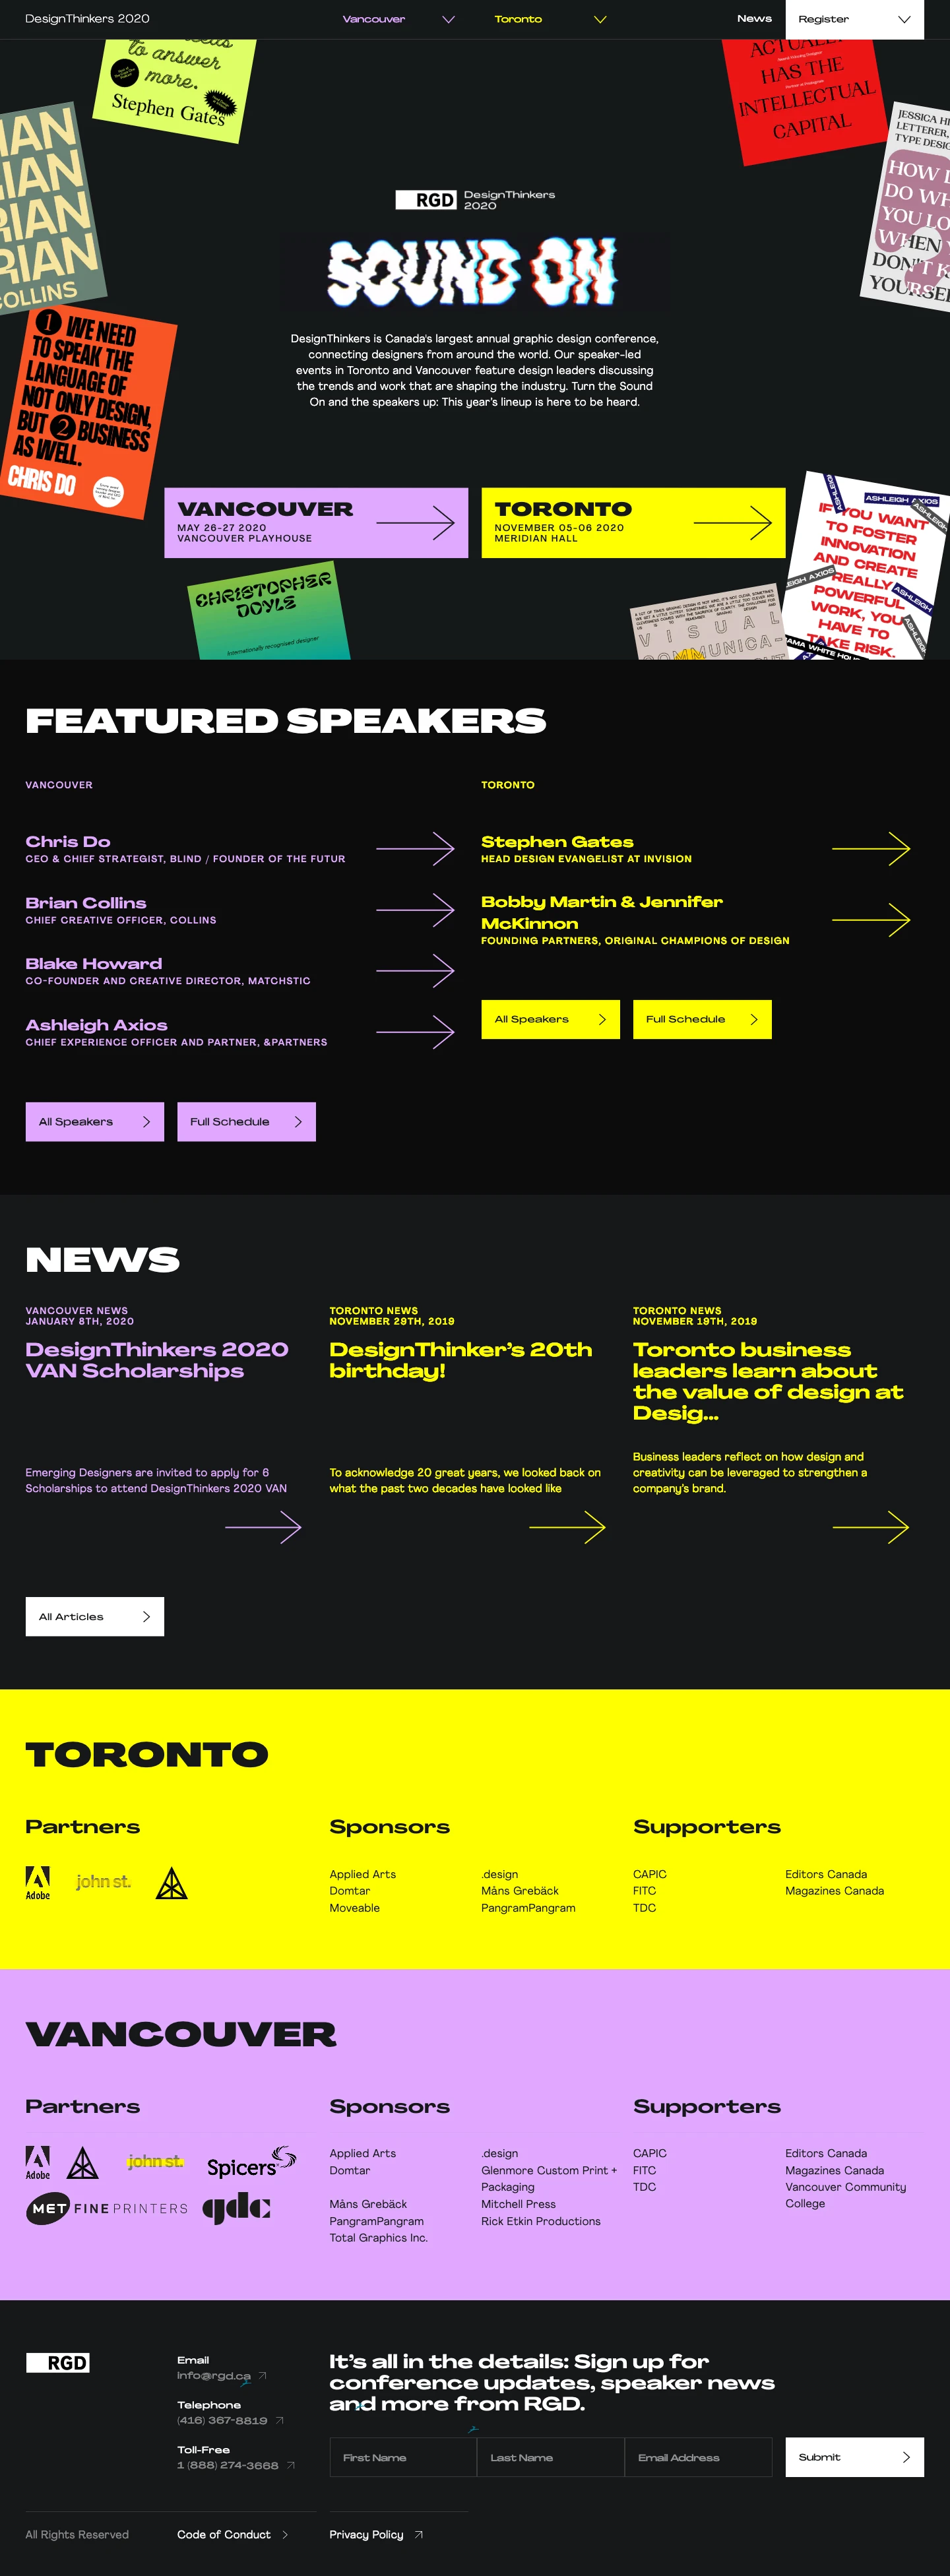 Design Thinkers 2020 Landing Page Example: DesignThinkers is Canada's largest annual graphic design conference, connecting designers from around the world. Our speaker-led events in Toronto and Vancouver feature design leaders discussing the trends and work that are shaping the industry. Turn the Sound On and the speakers up: This year’s lineup is here to be heard.